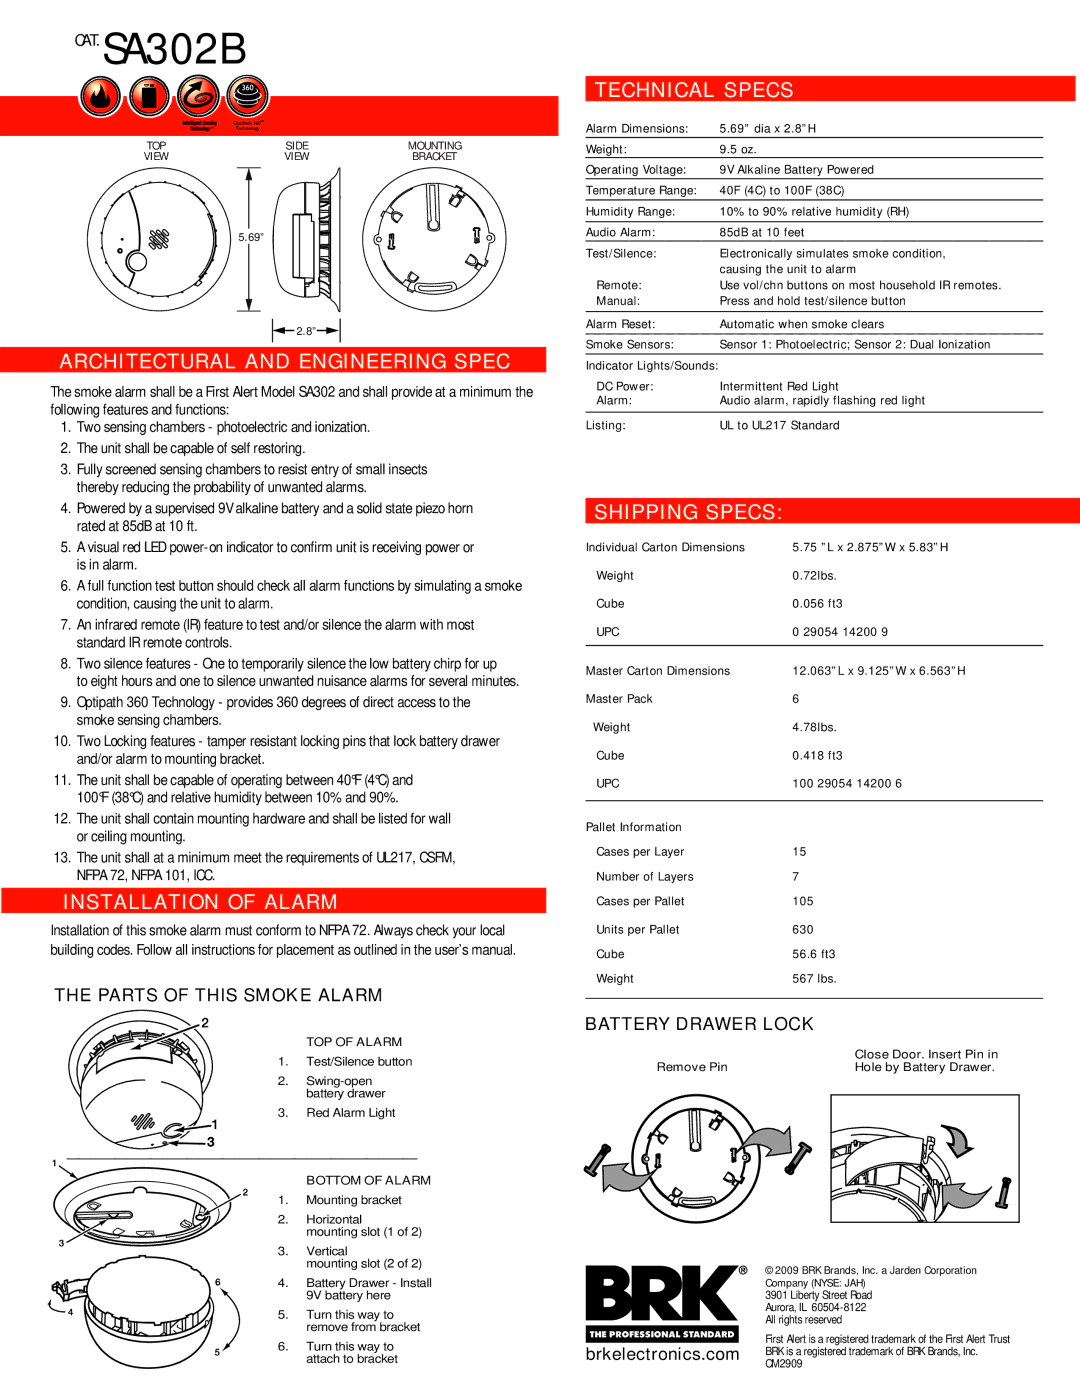 First Alert SA302B manual Architectural and Engineering Spec, Installation of Alarm, Technical Specs, Shipping Specs 